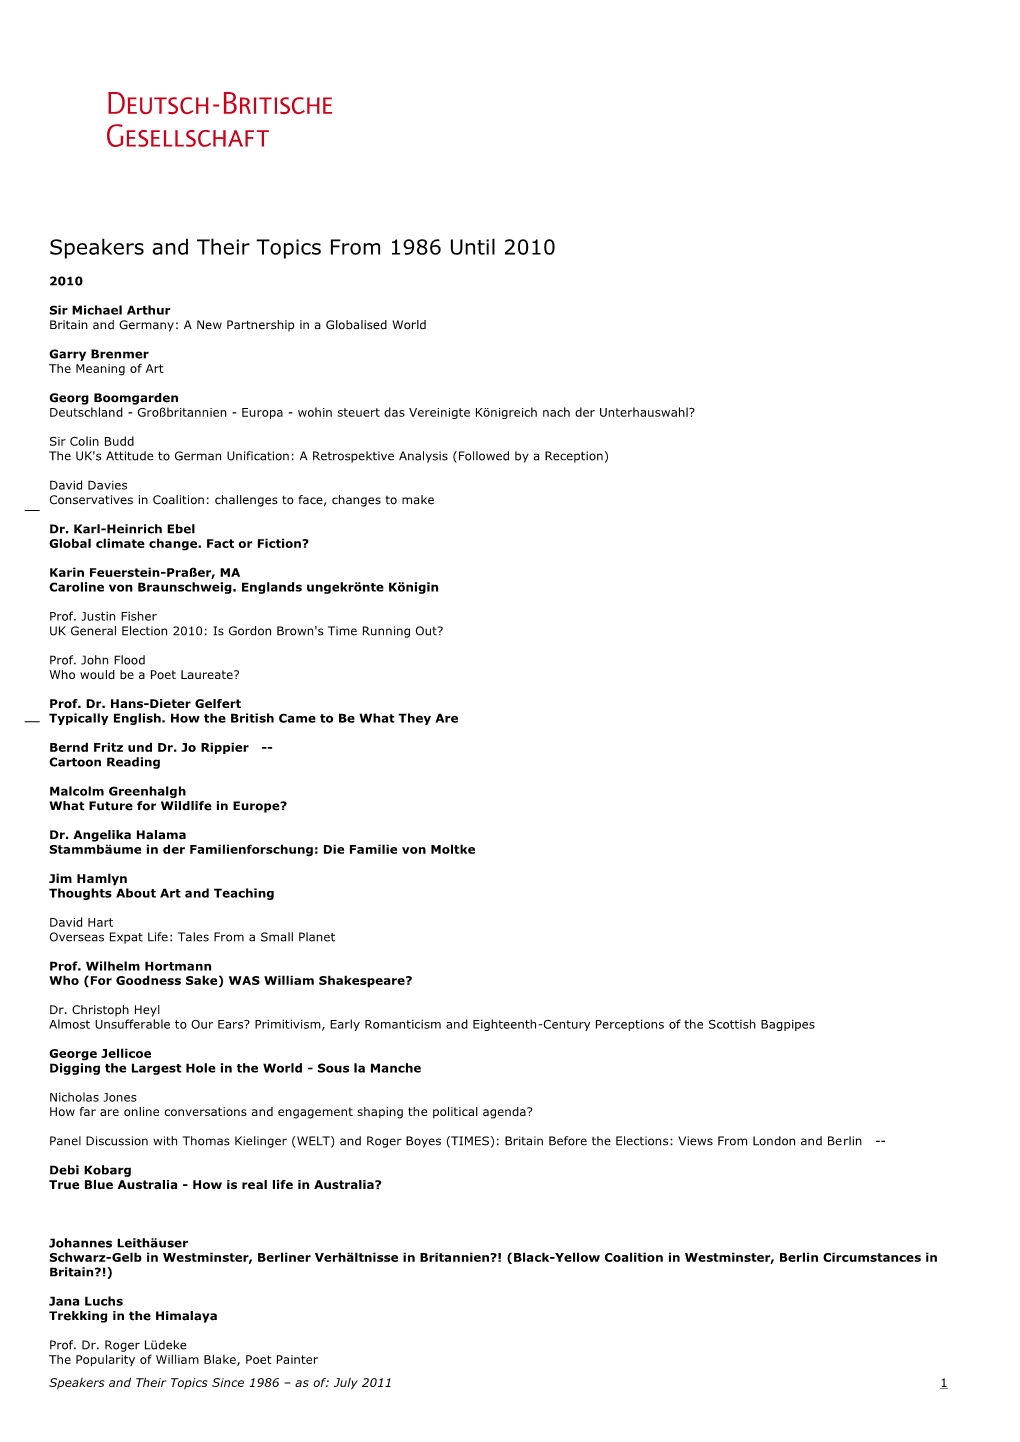 Speakers and Their Topics from 1986 Until 2010